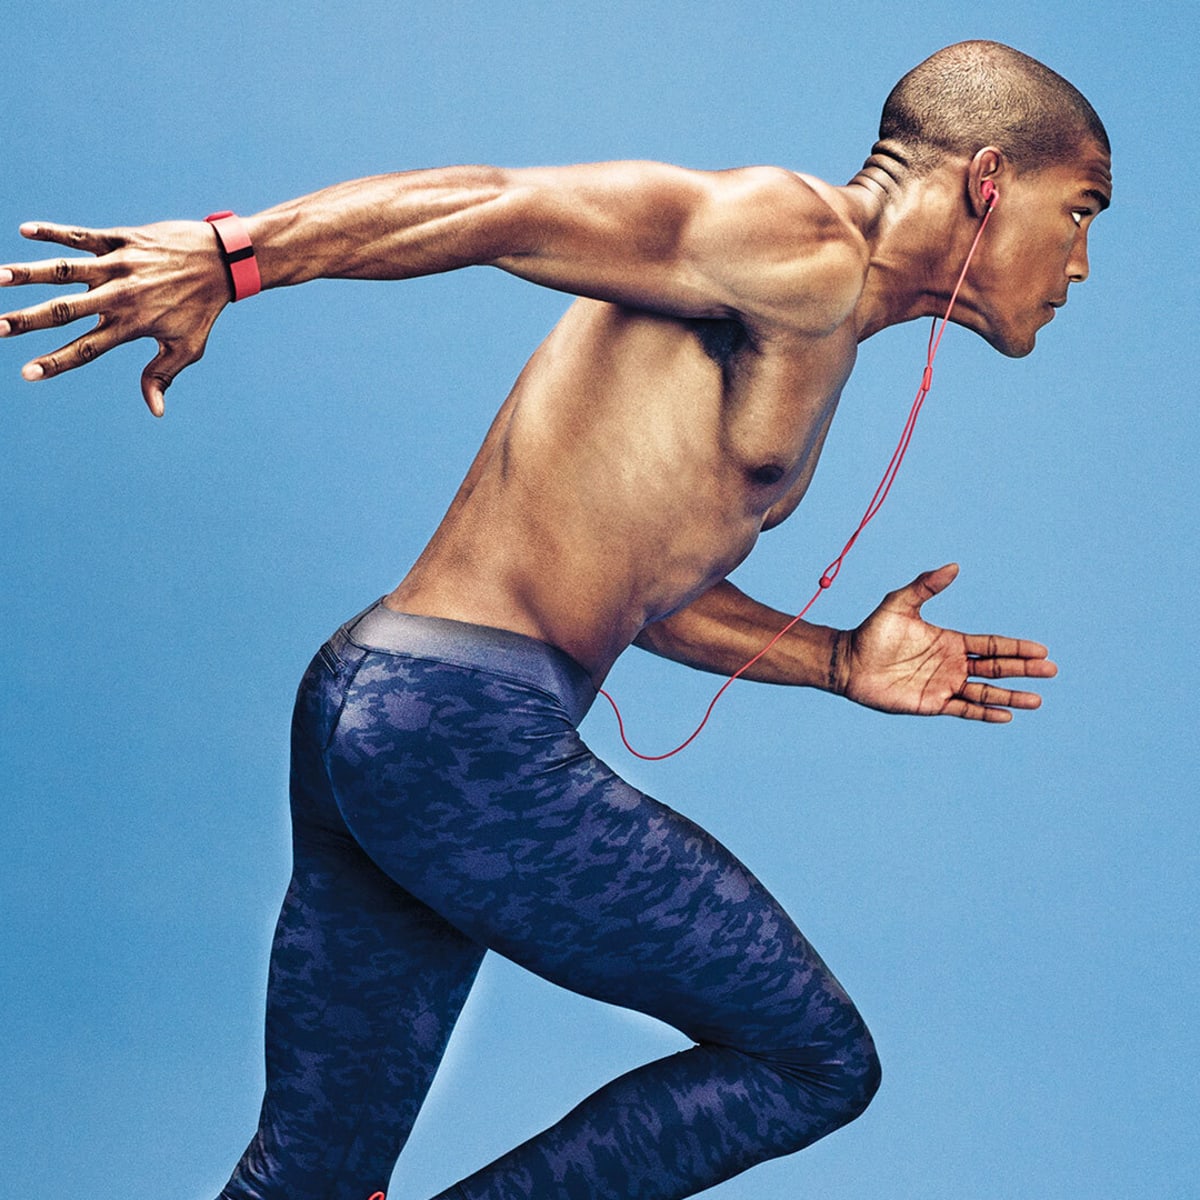 Push to the Next Level with This High-intensity, Lower-Body